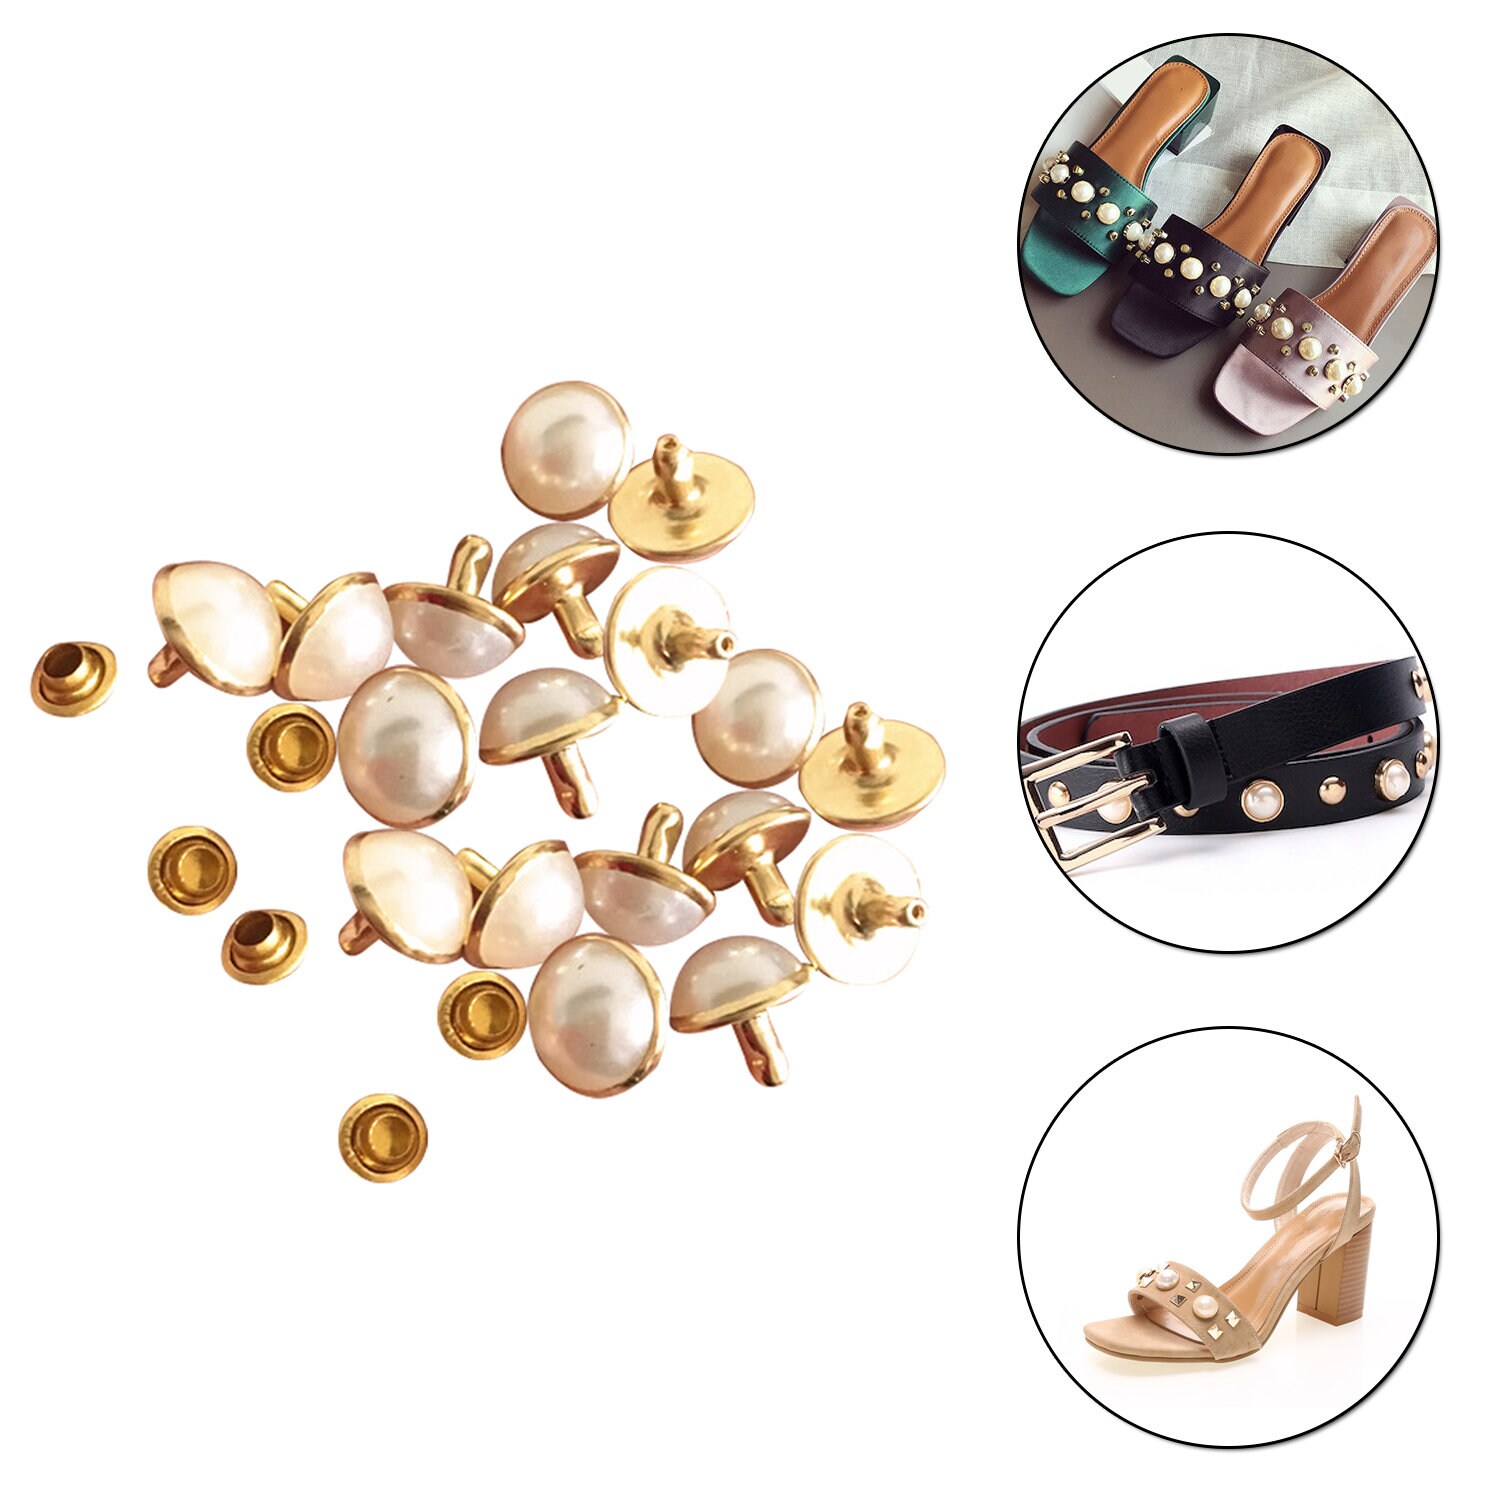 Saktopdeco 180 Pairs Mix Size Pearl Rivet Studs 6mm 8mm White Faux Pearls Pearl Rivets for Leather Clothing Dog Collar Bag DIY Decoration 